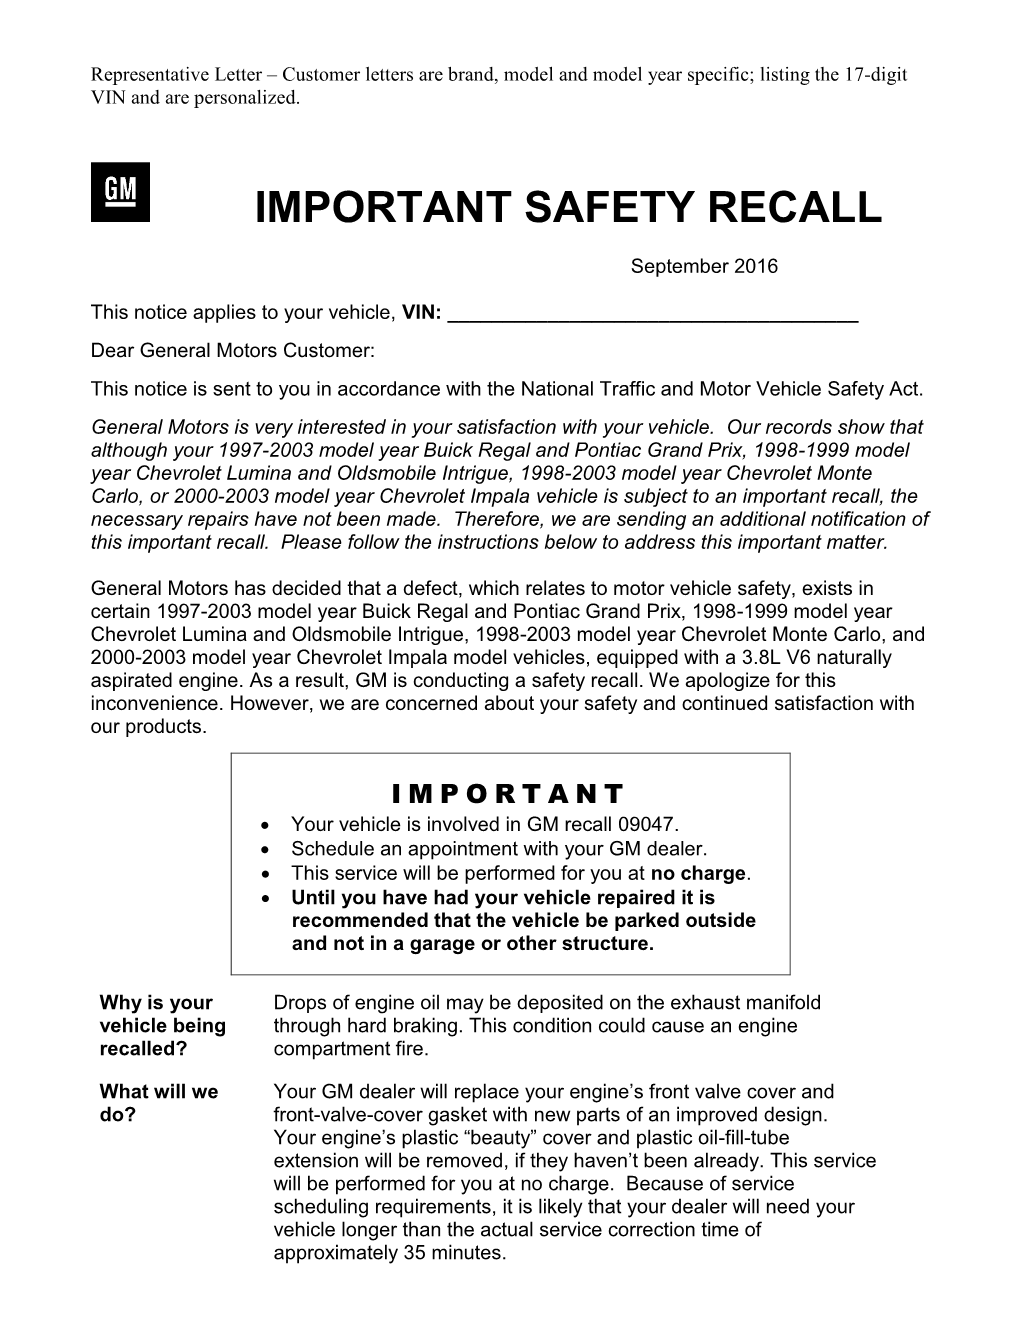 Important Safety Recall